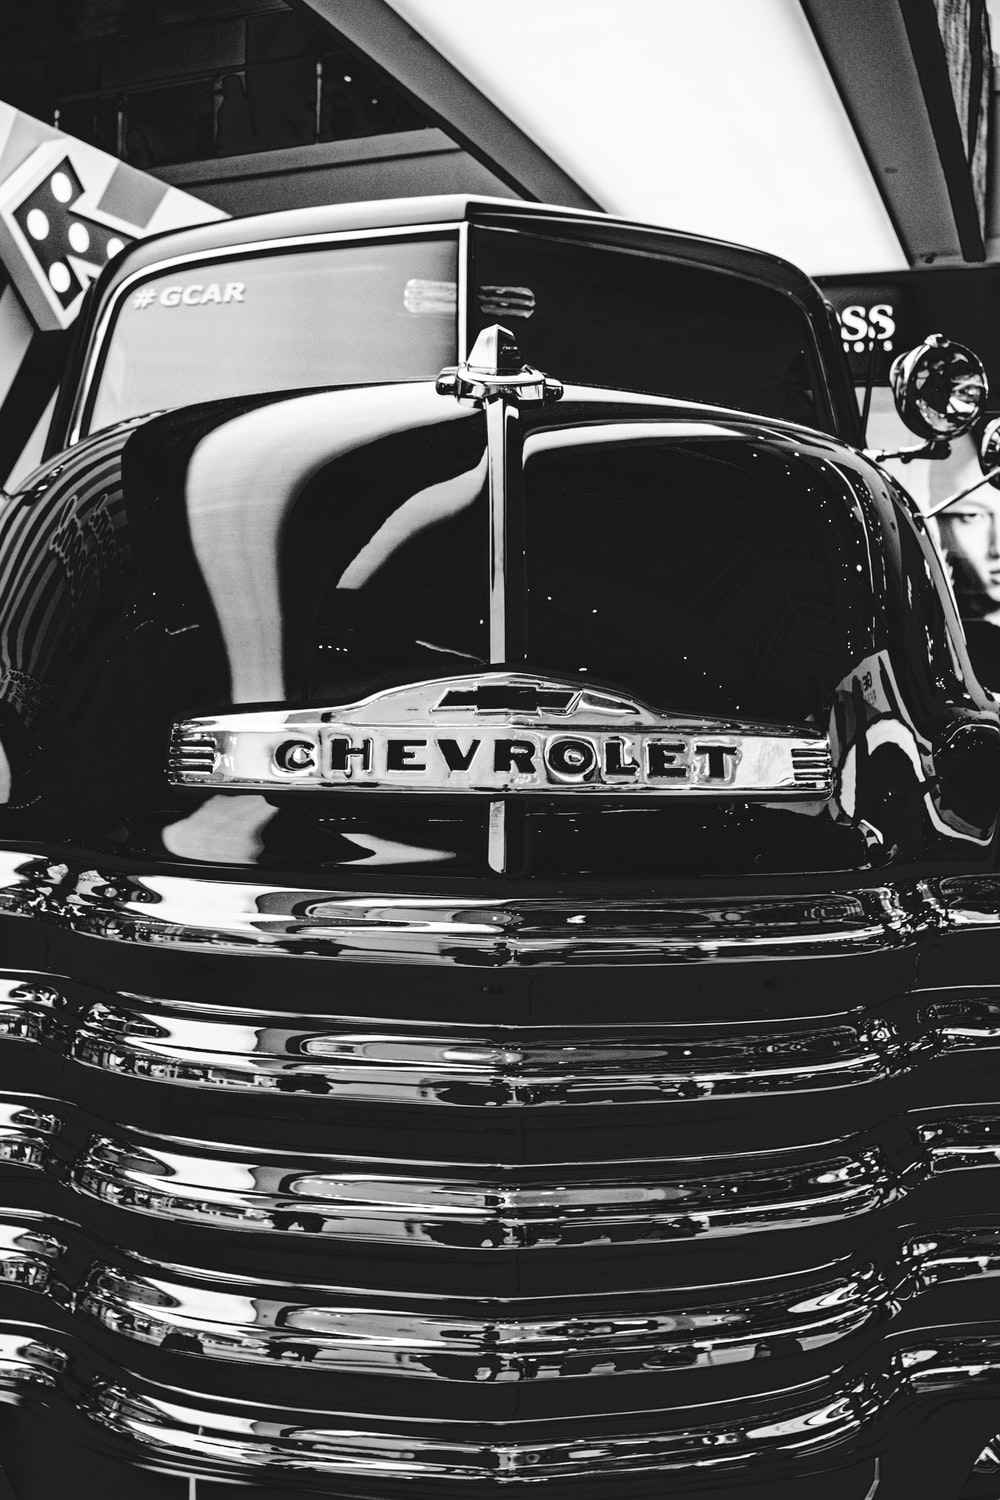 Old Chevrolet Picture. Download Free Image